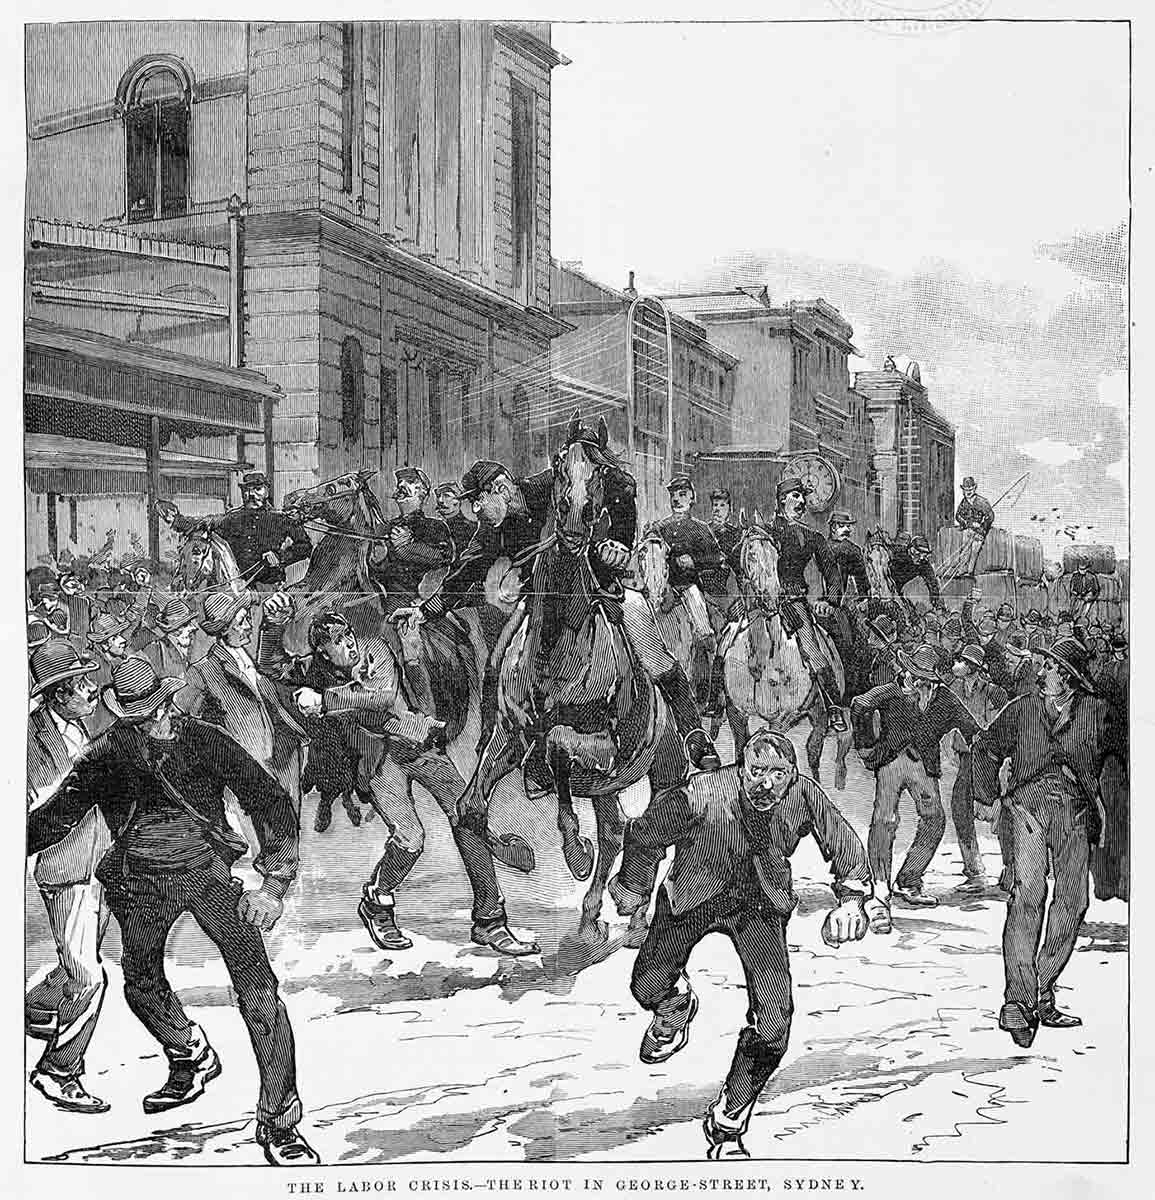 Drawing of men running among police on horseback. Wooden buildings in background.